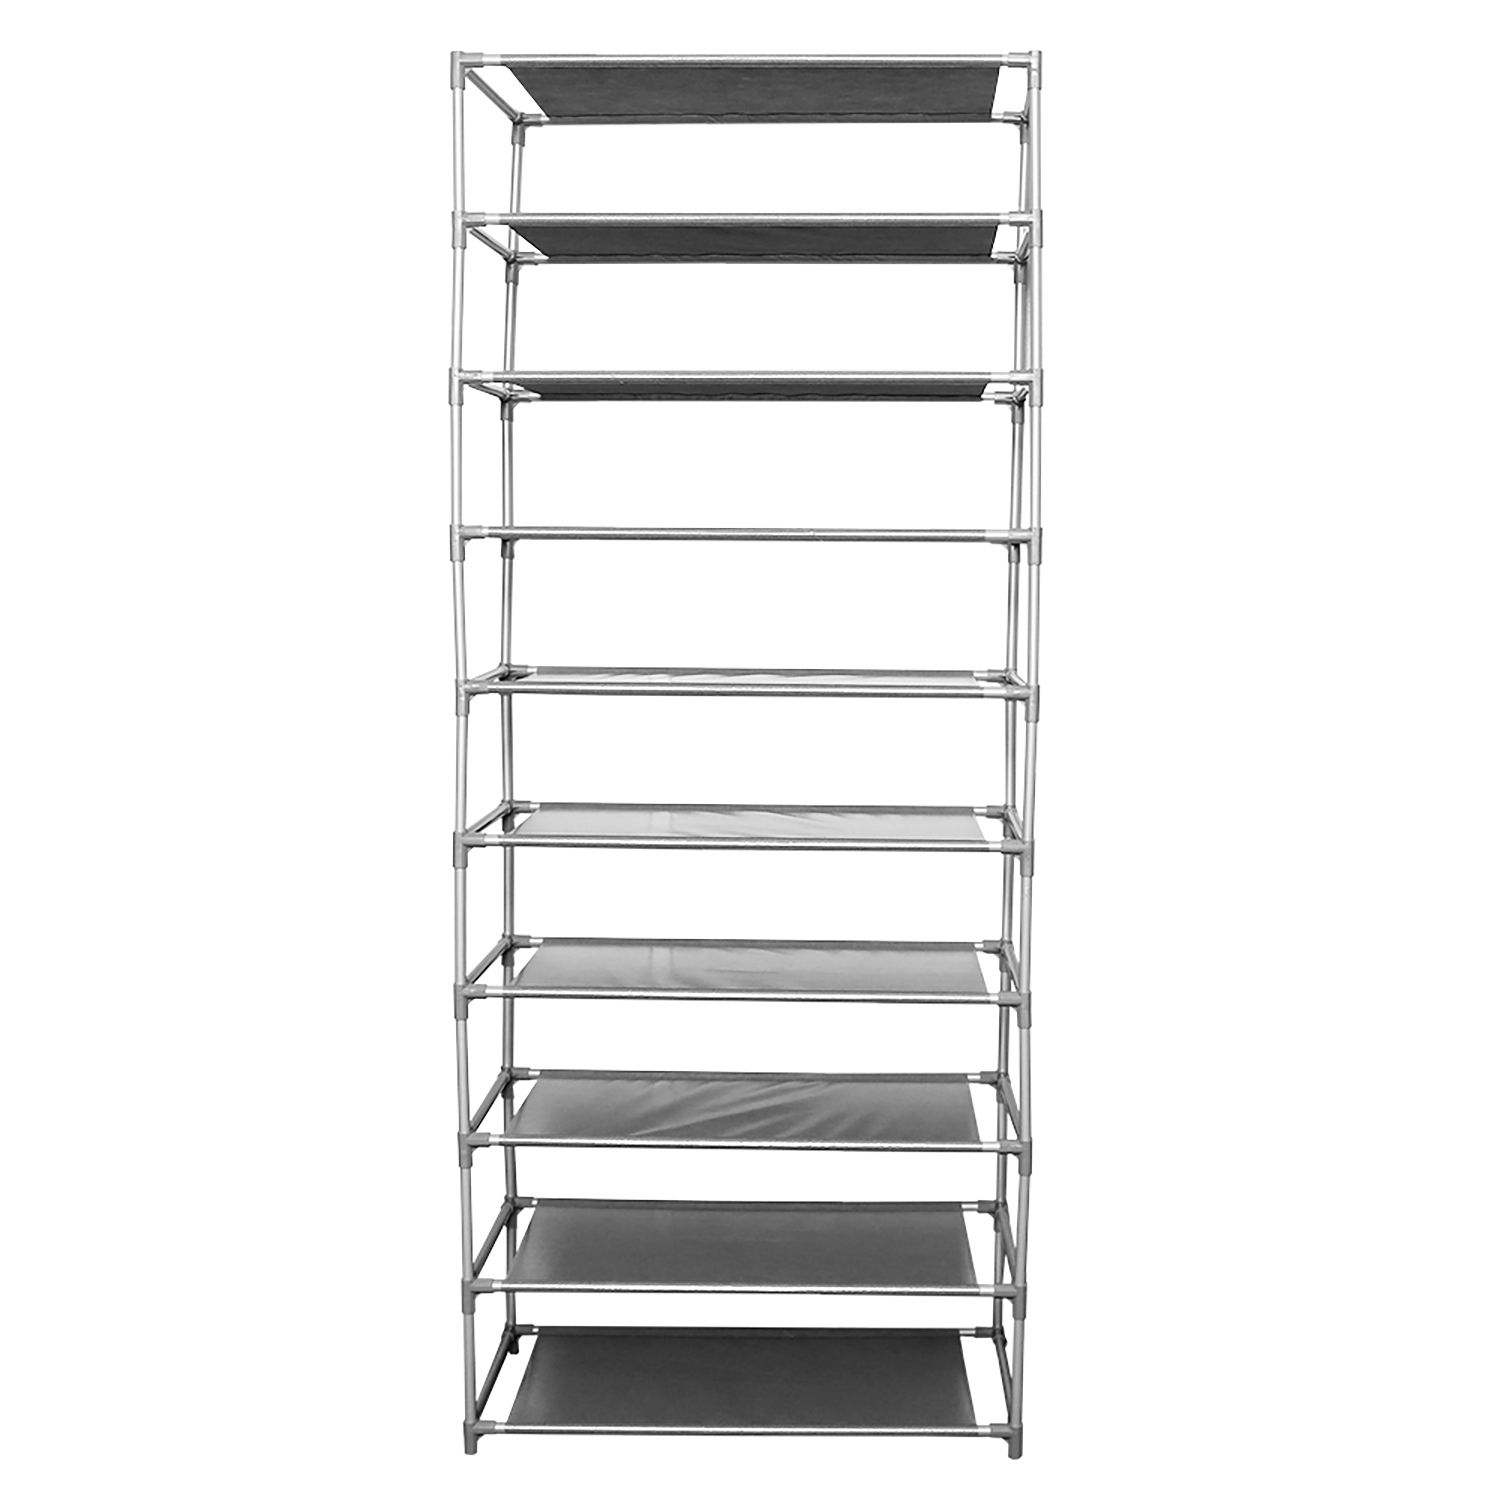 Image for Home Basics 50 Pair Multi-Purpose Stackable Free-Standing Shoe Rack at Kohl's.